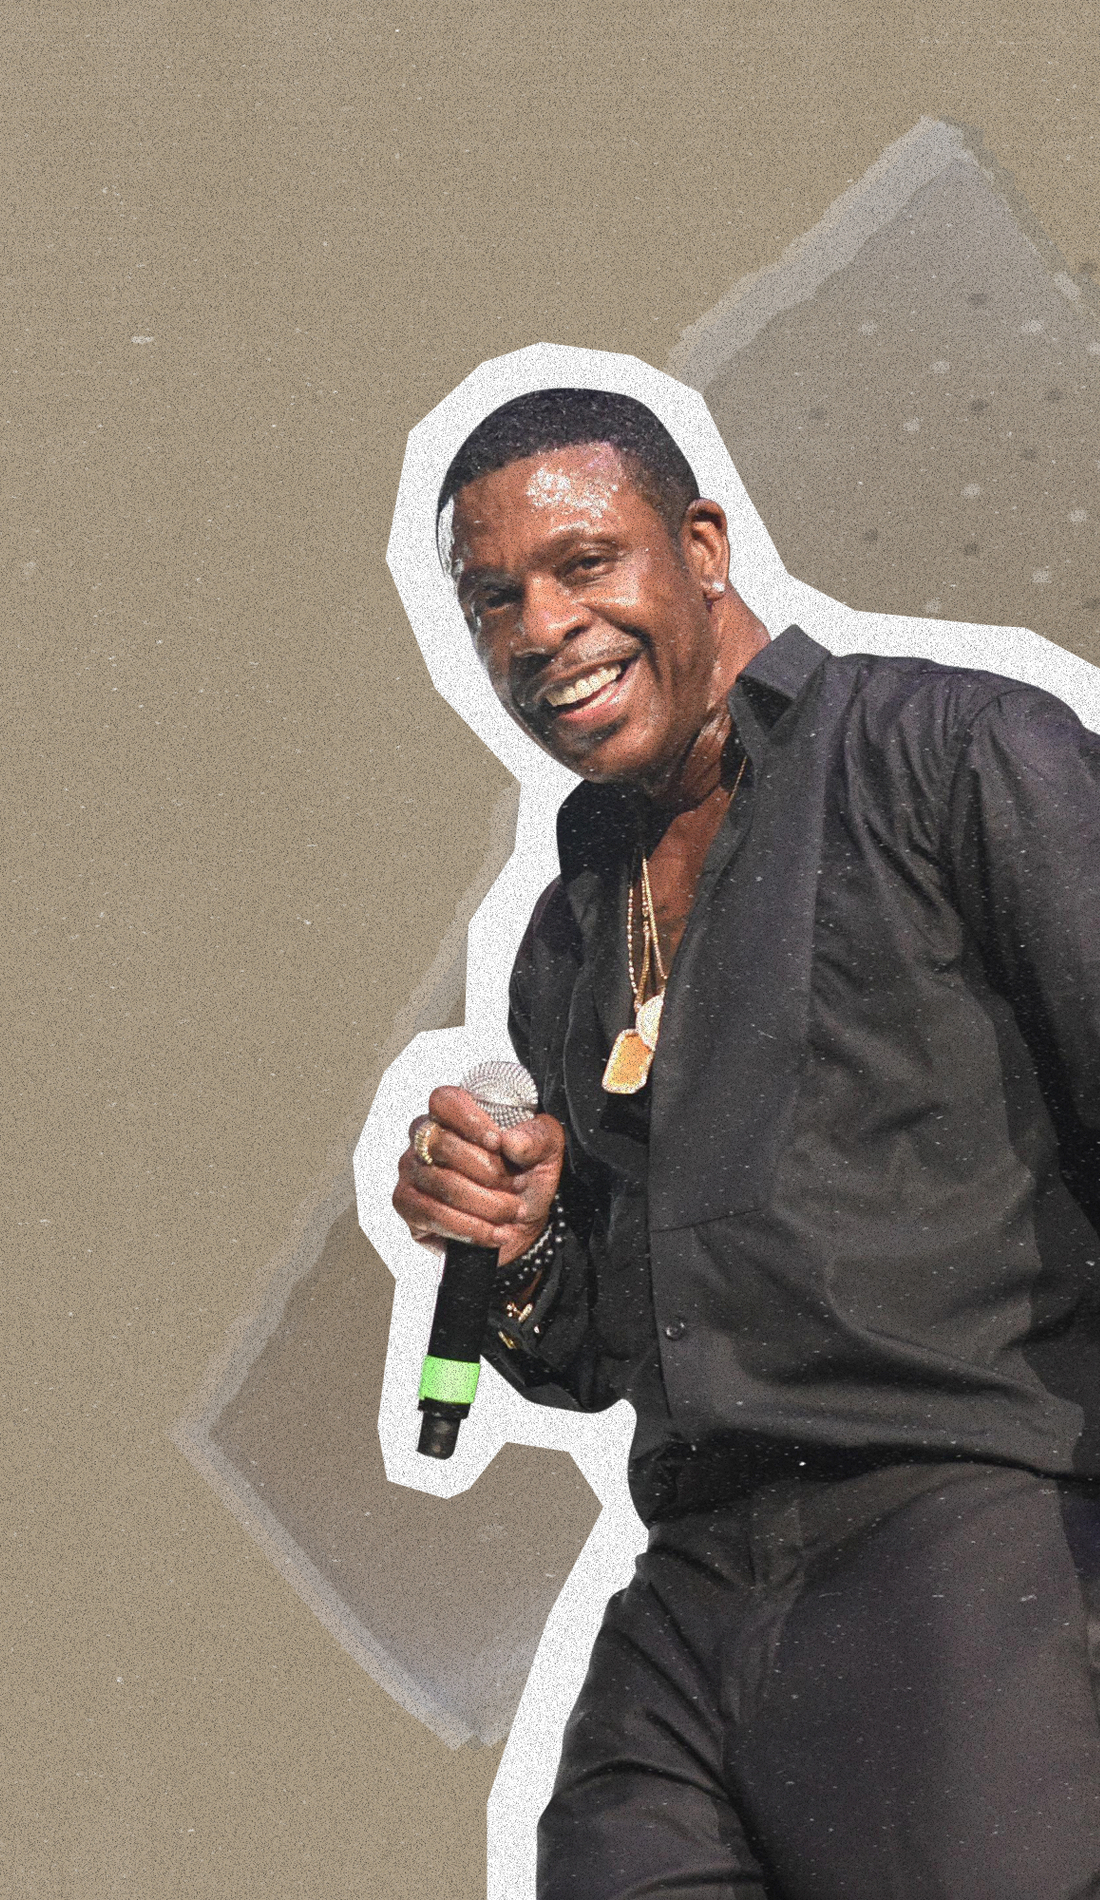 A Keith Sweat live event